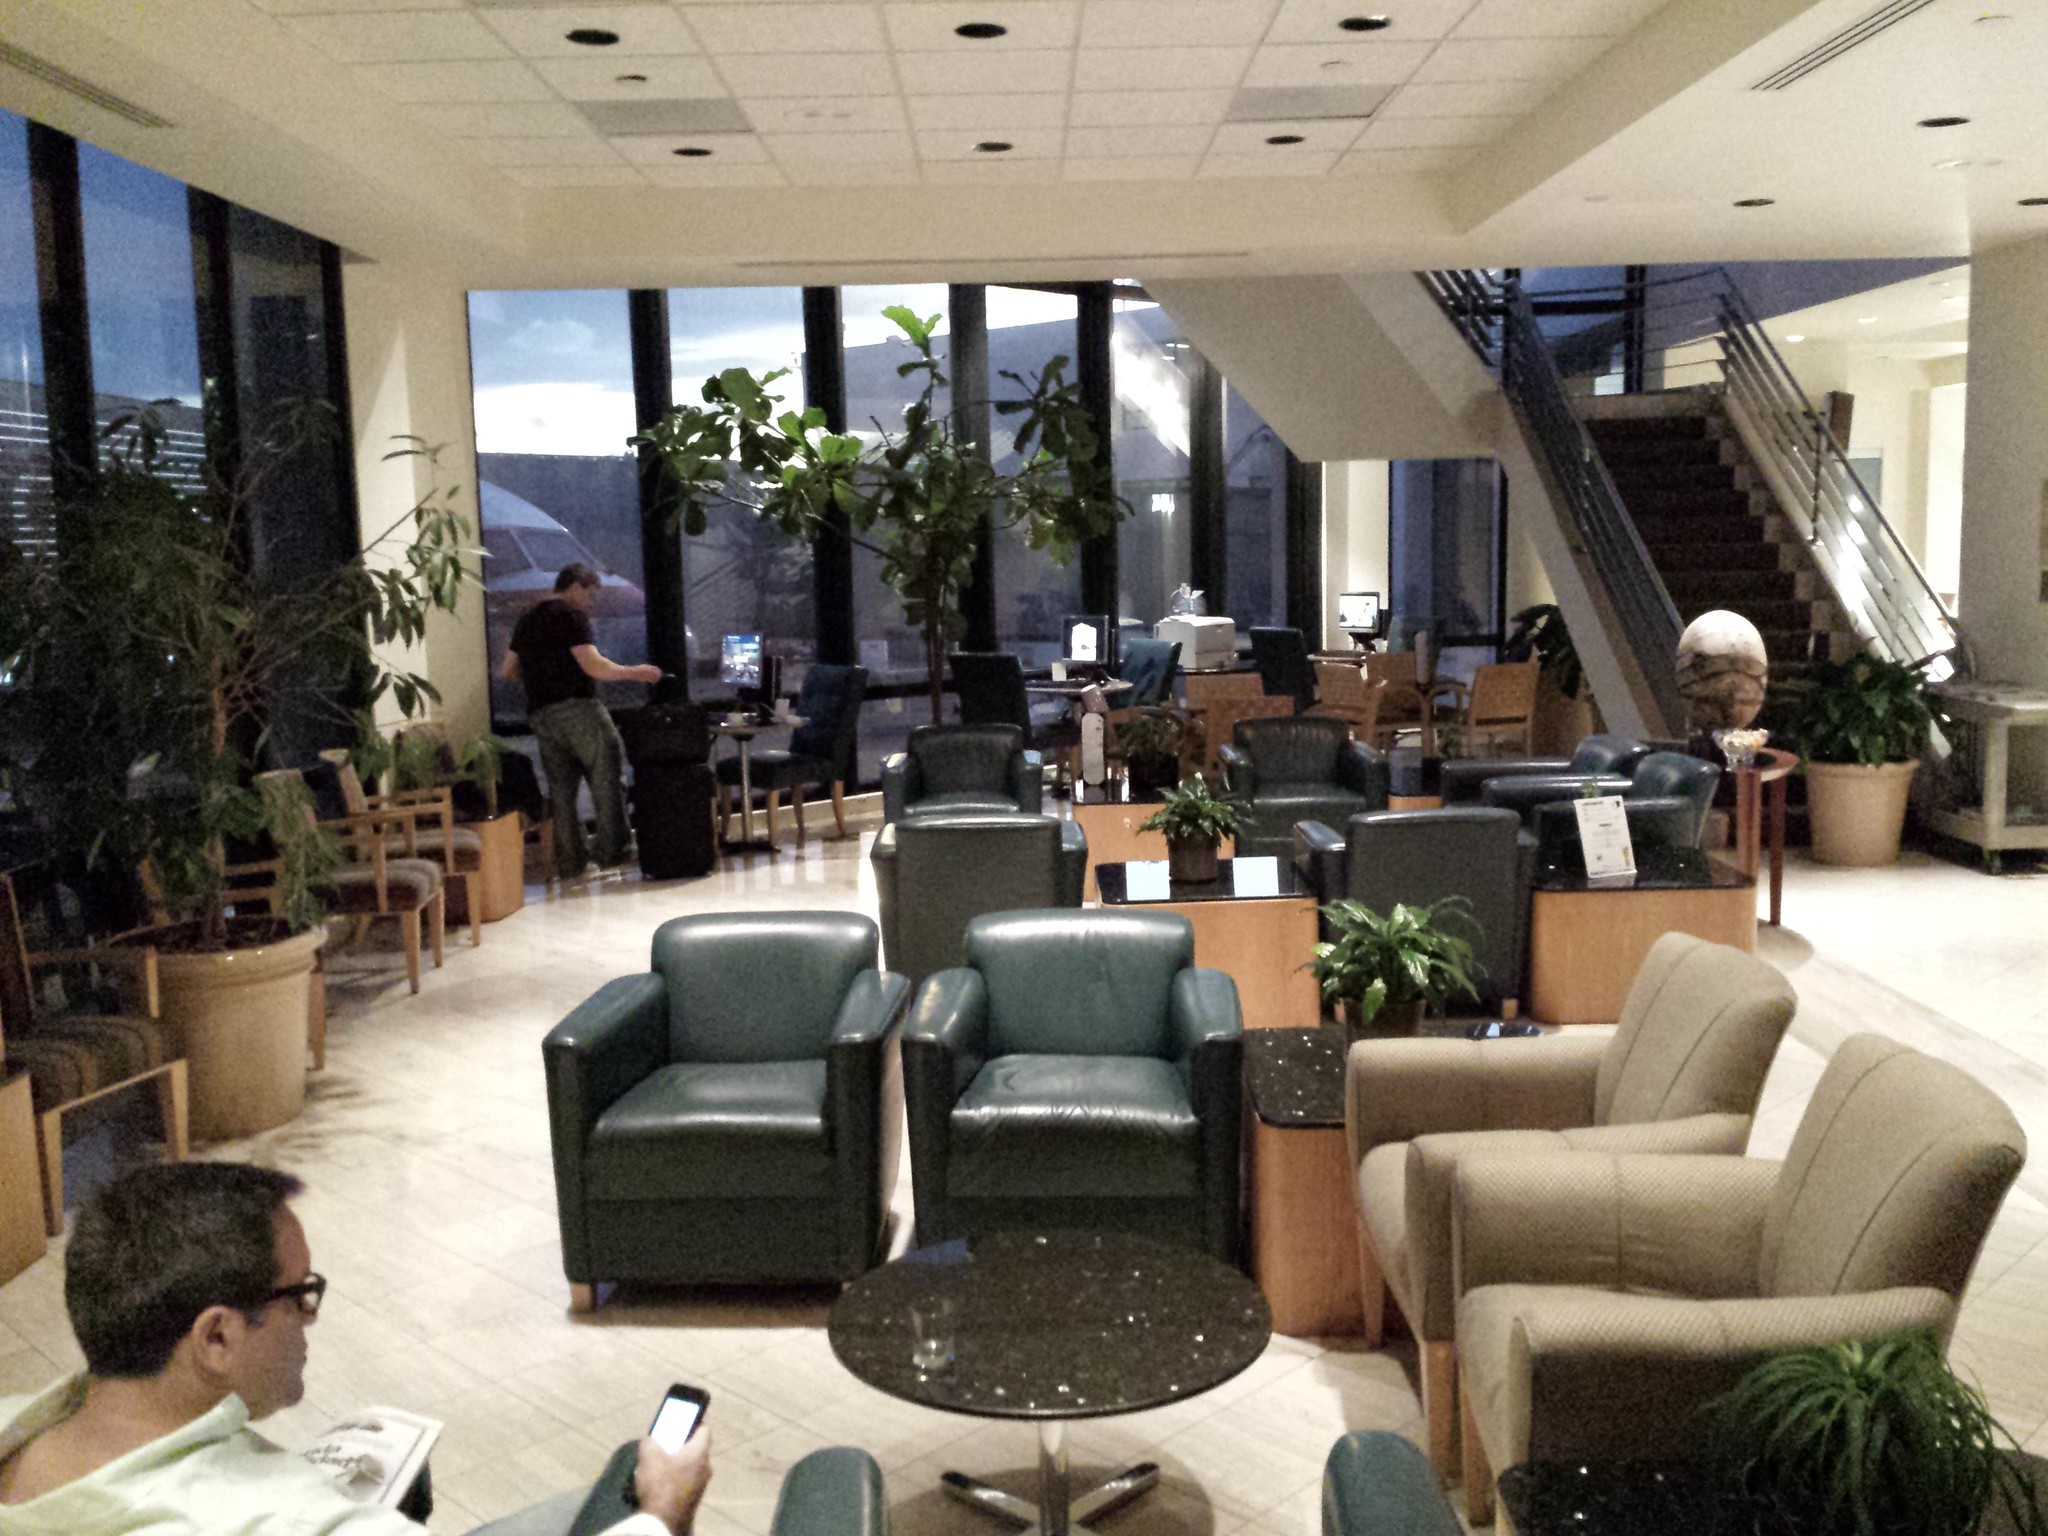 Inside the AA's Admiral's Club at San Juan airport